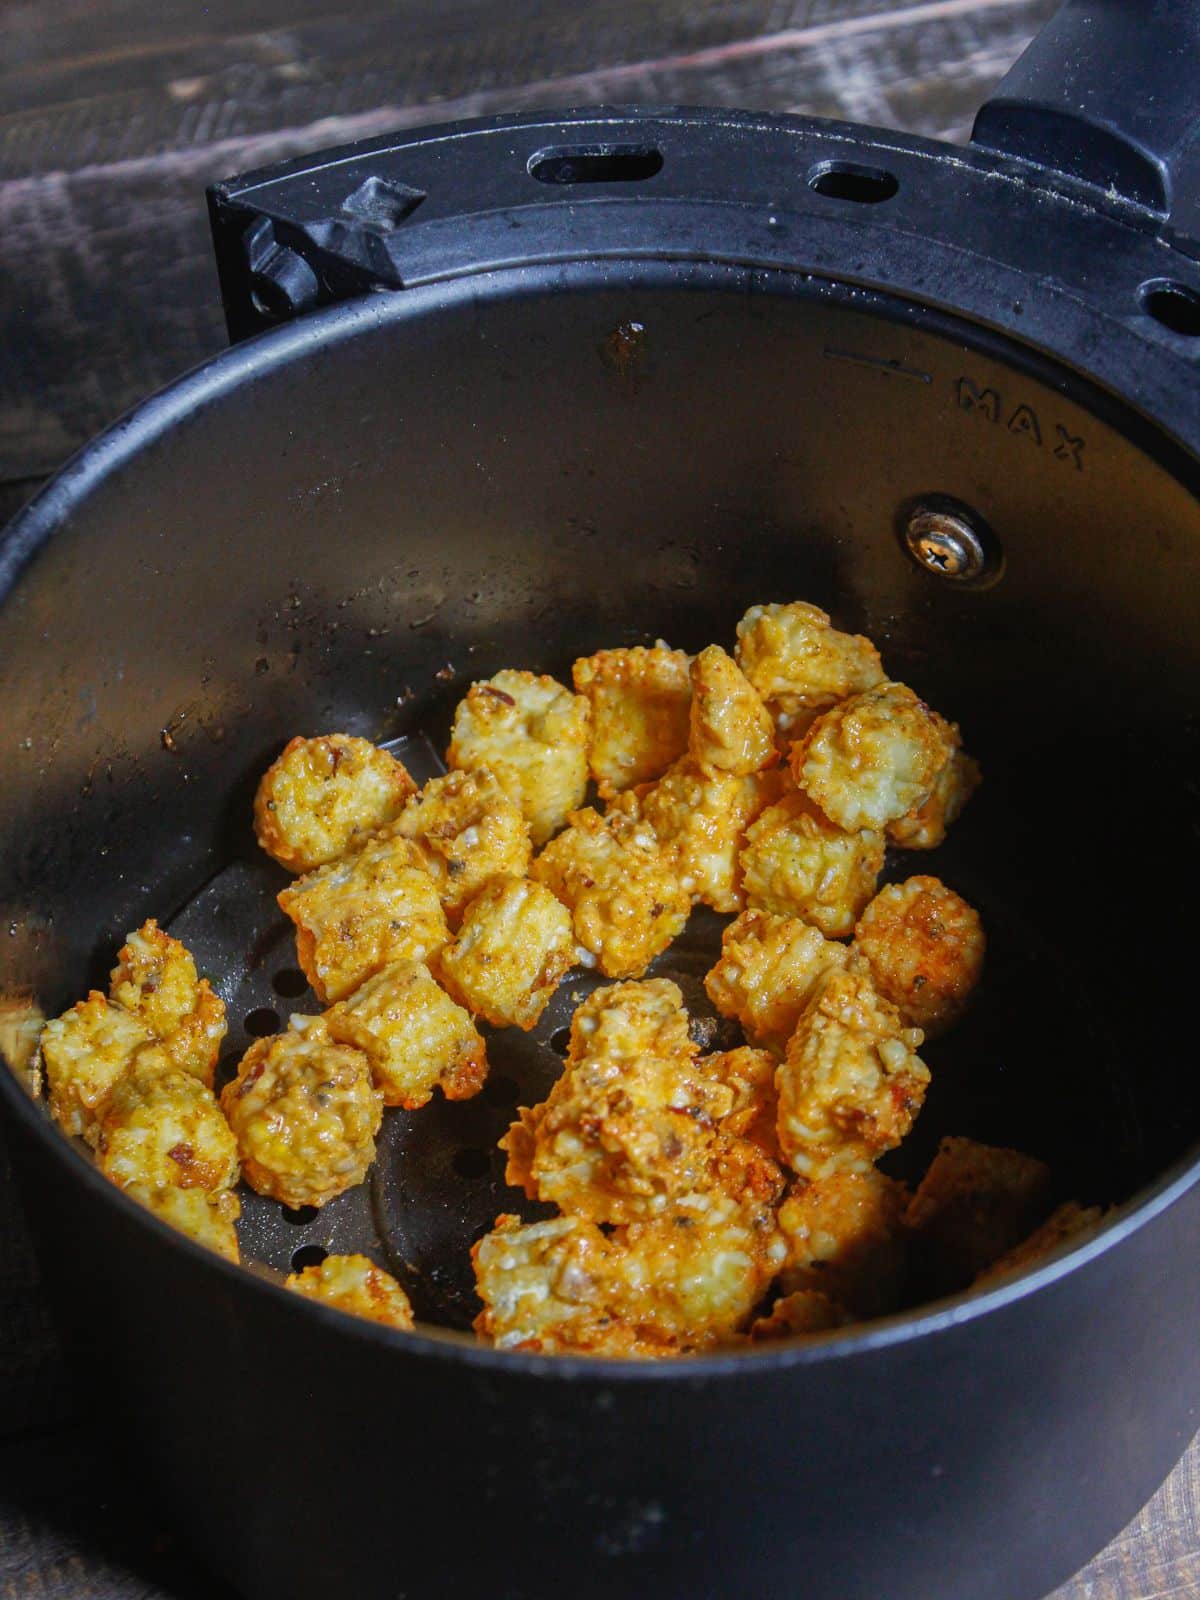 Transfer the coated corn into air fryer 